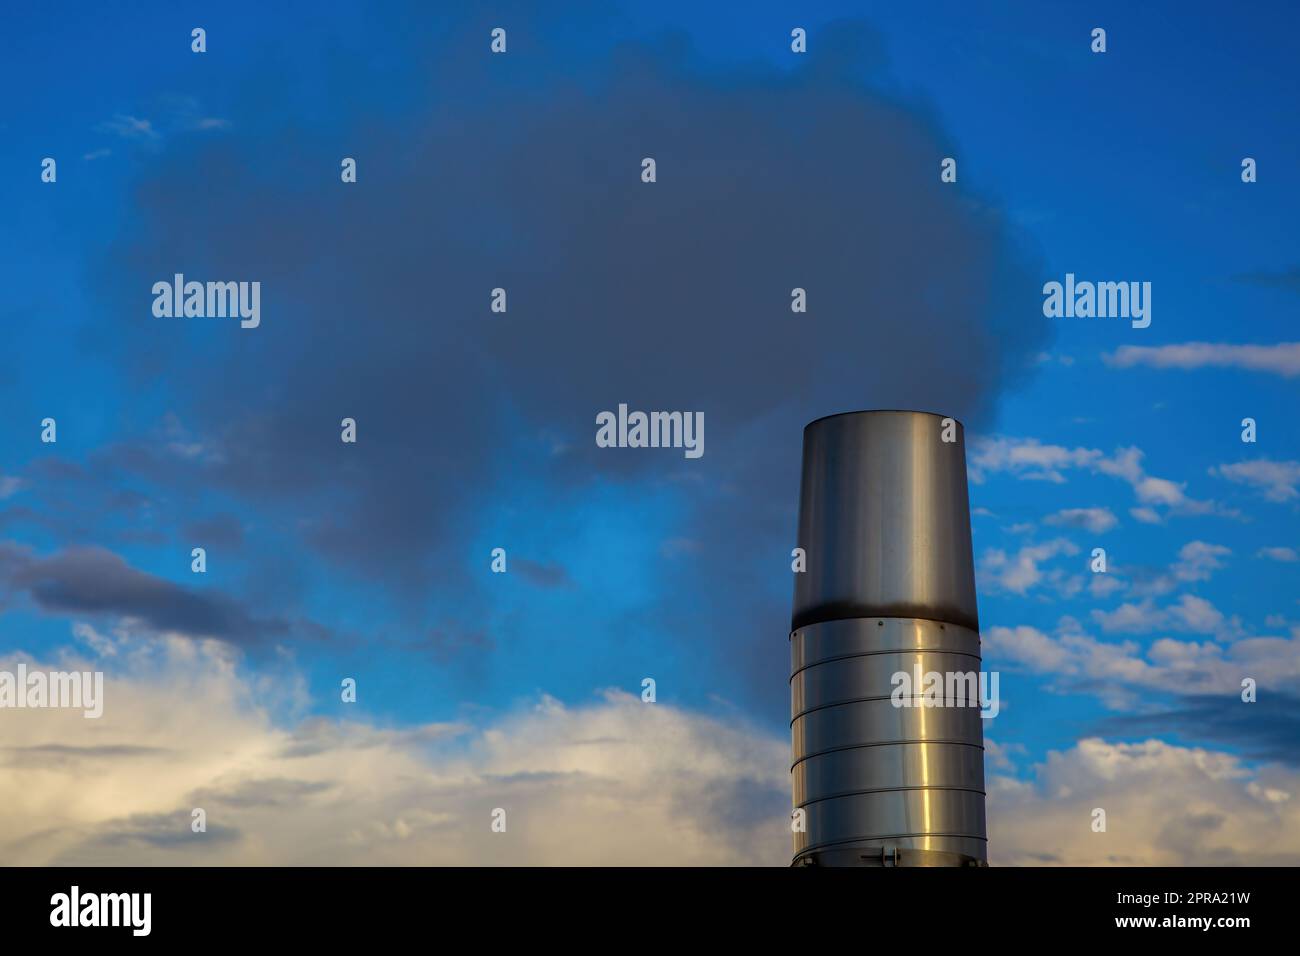 chimney smoke pollution co2 global warming environmental problem greenhouse effect blue sky clouds Stock Photo